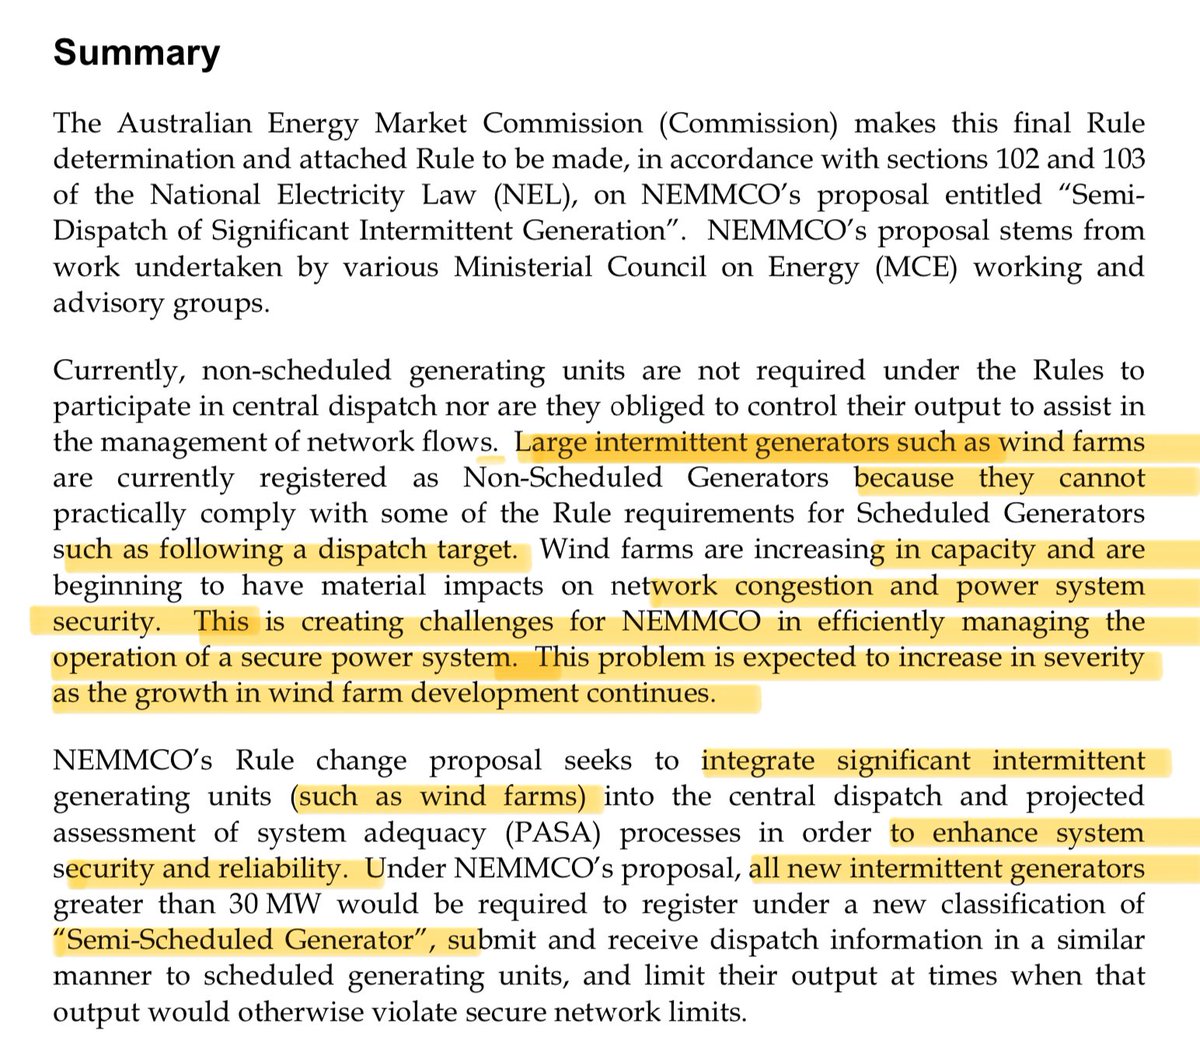 The Australian Energy Market Commission had to make fundamental rule changes to mitigate ‘material impact of large intermittent generators’ to power system security & reliability. ‘The problem is expected to increase in severity as growth of wind farms continues’